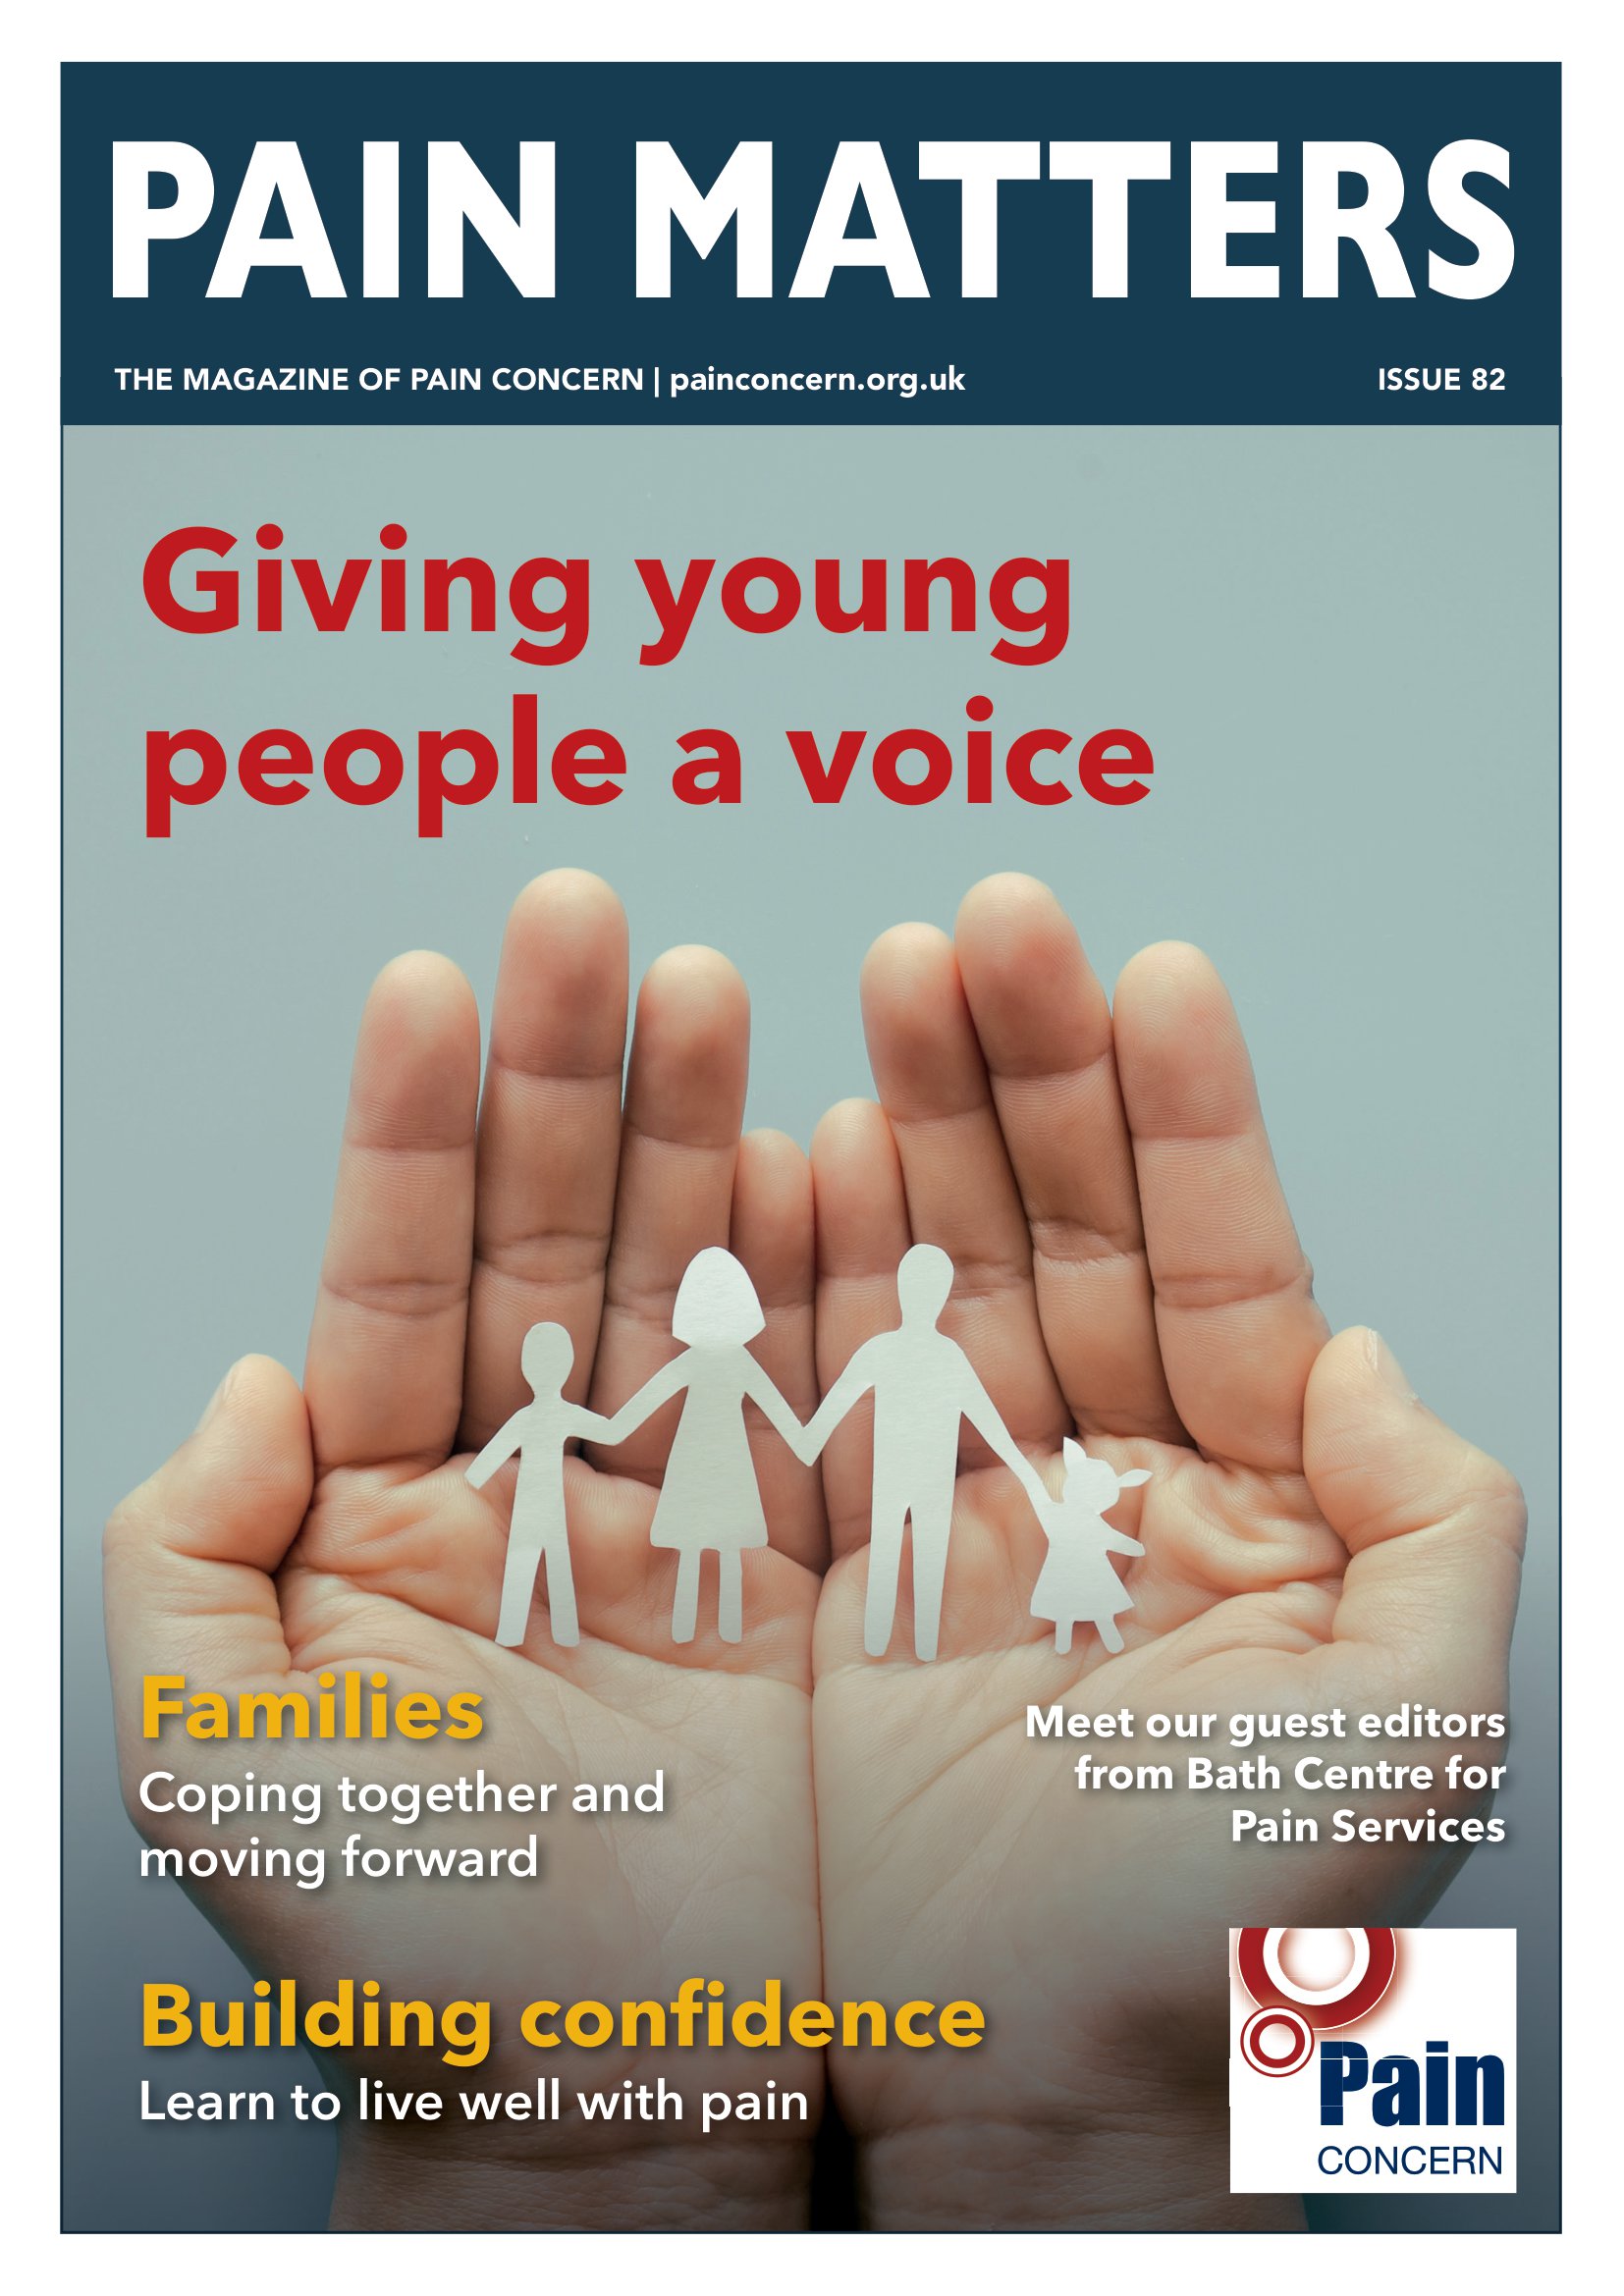 Cover of Pain Matters magazine 82. Title says 'Giving young people a voice'.